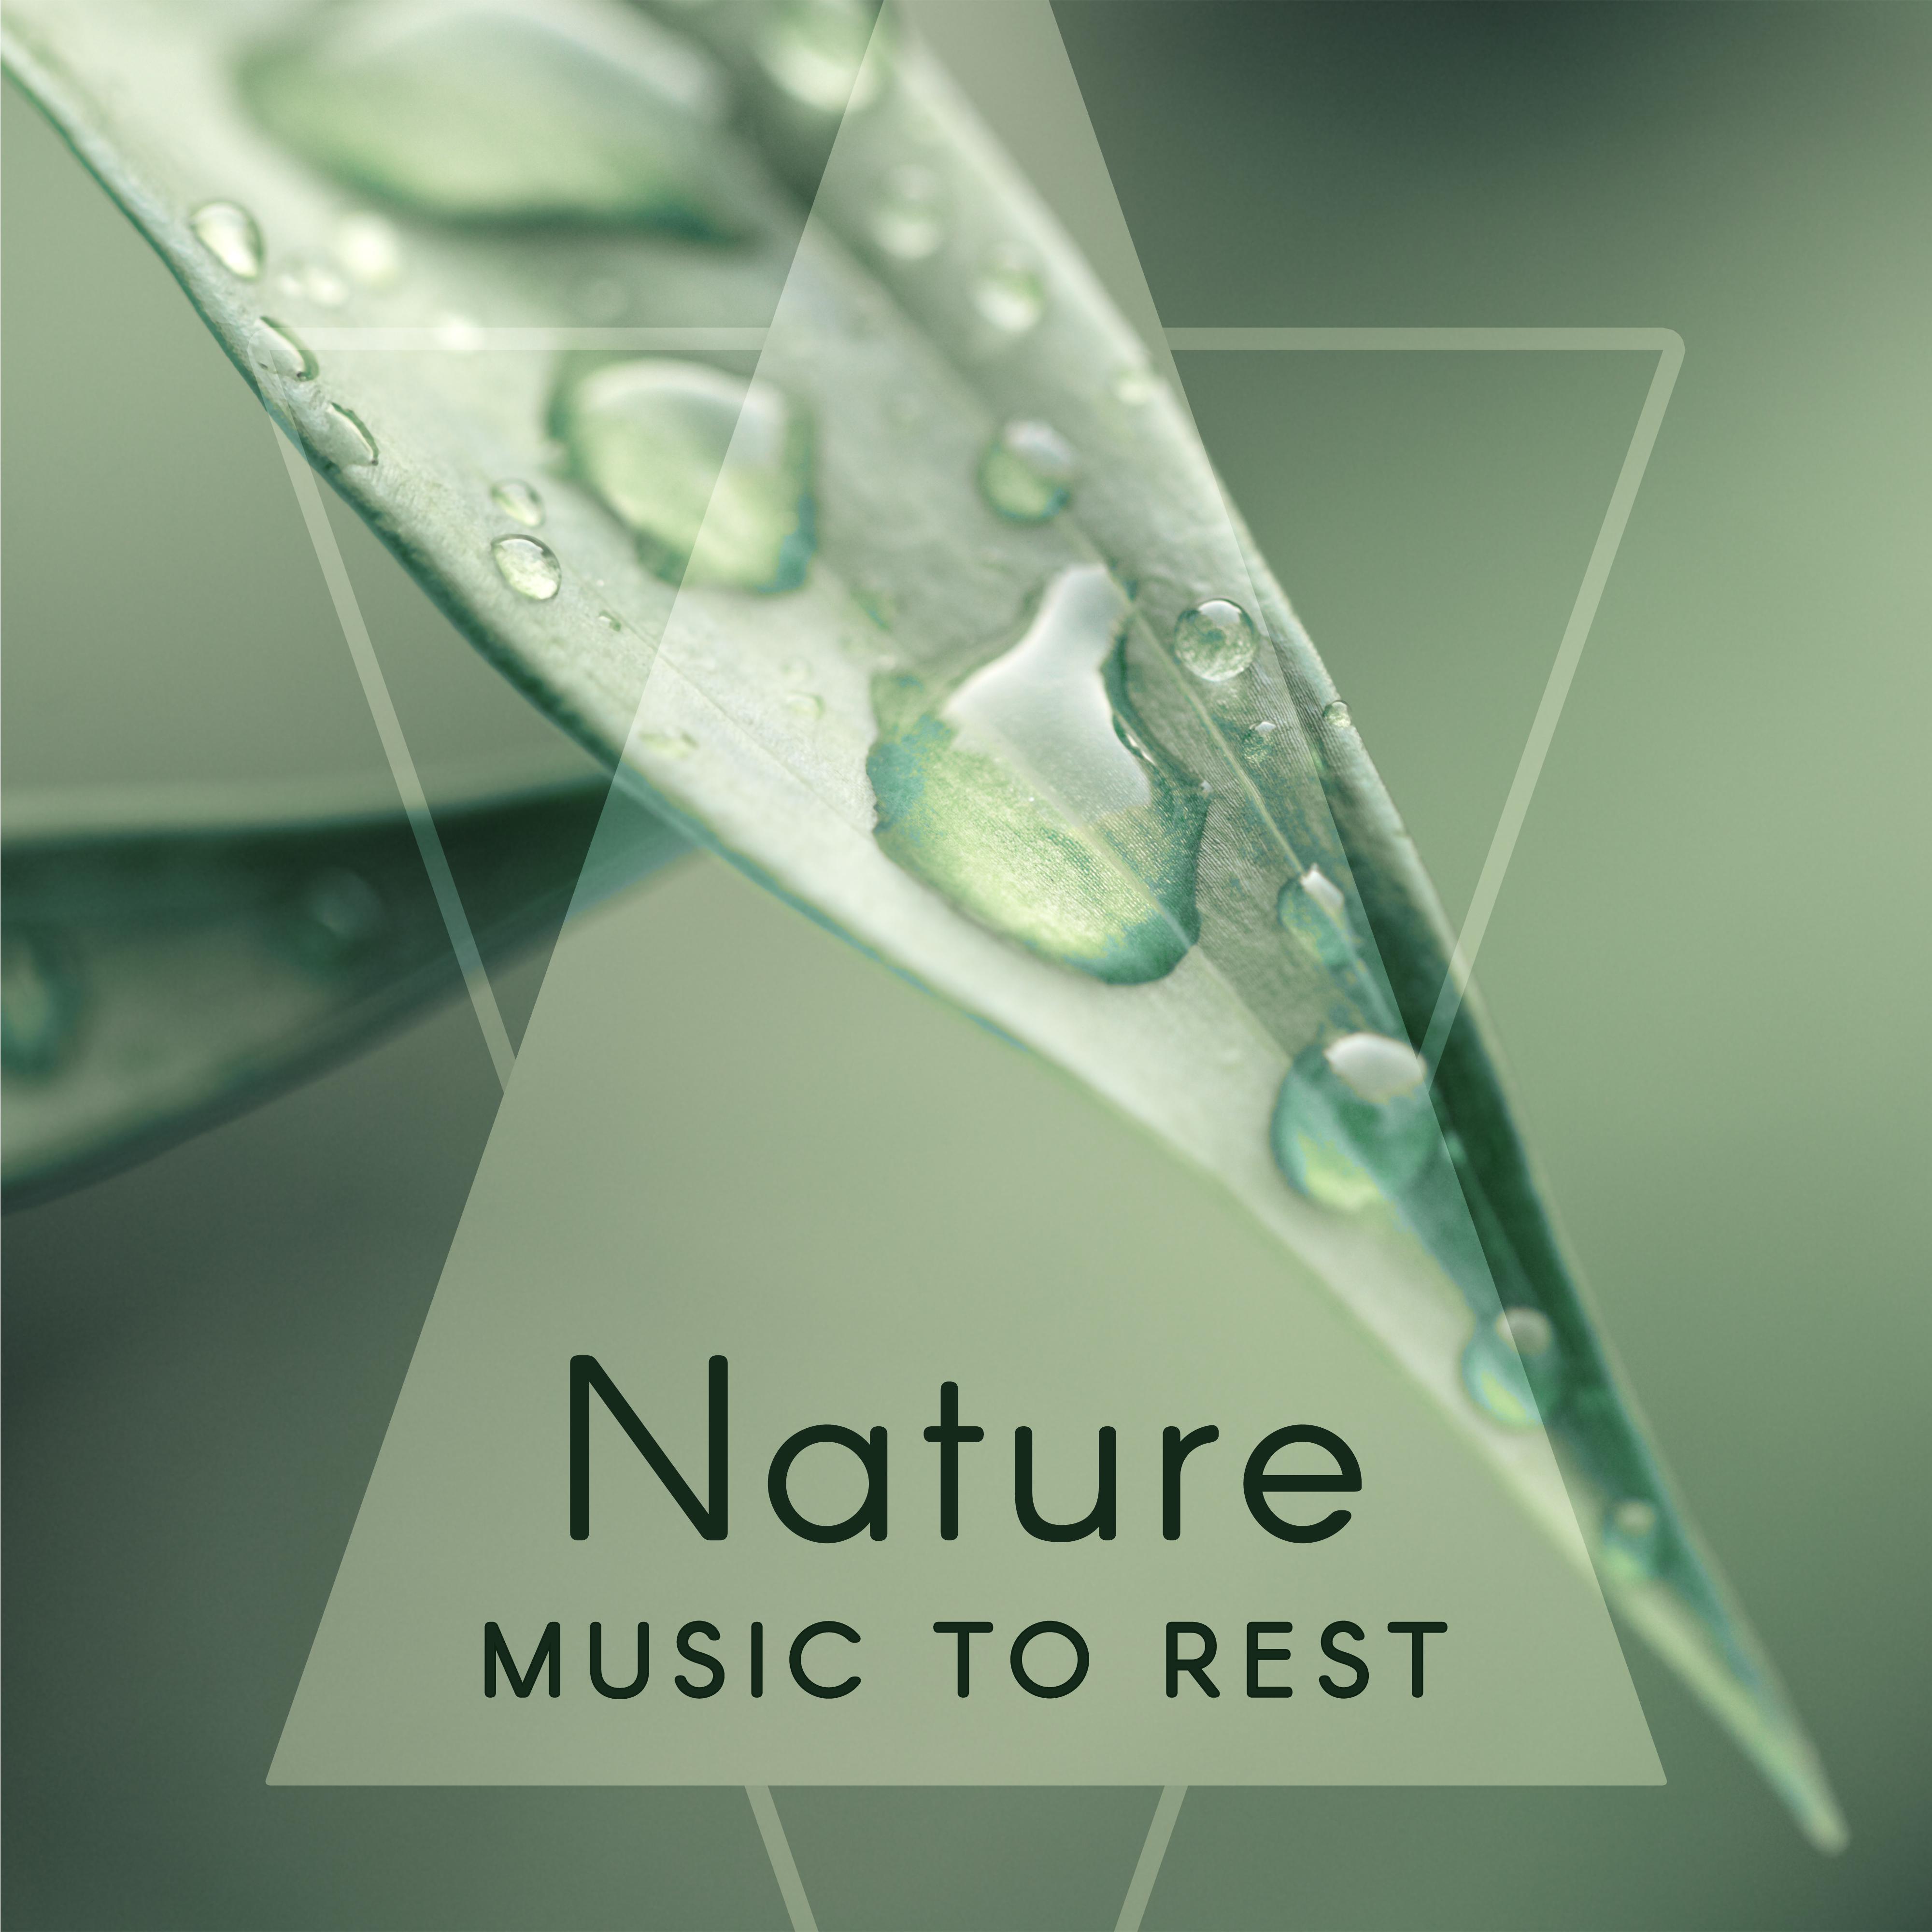 Nature Music to Rest  Soothing Waves, Nature Relaxation, New Age Calm Music, Sounds to Rest  Relax